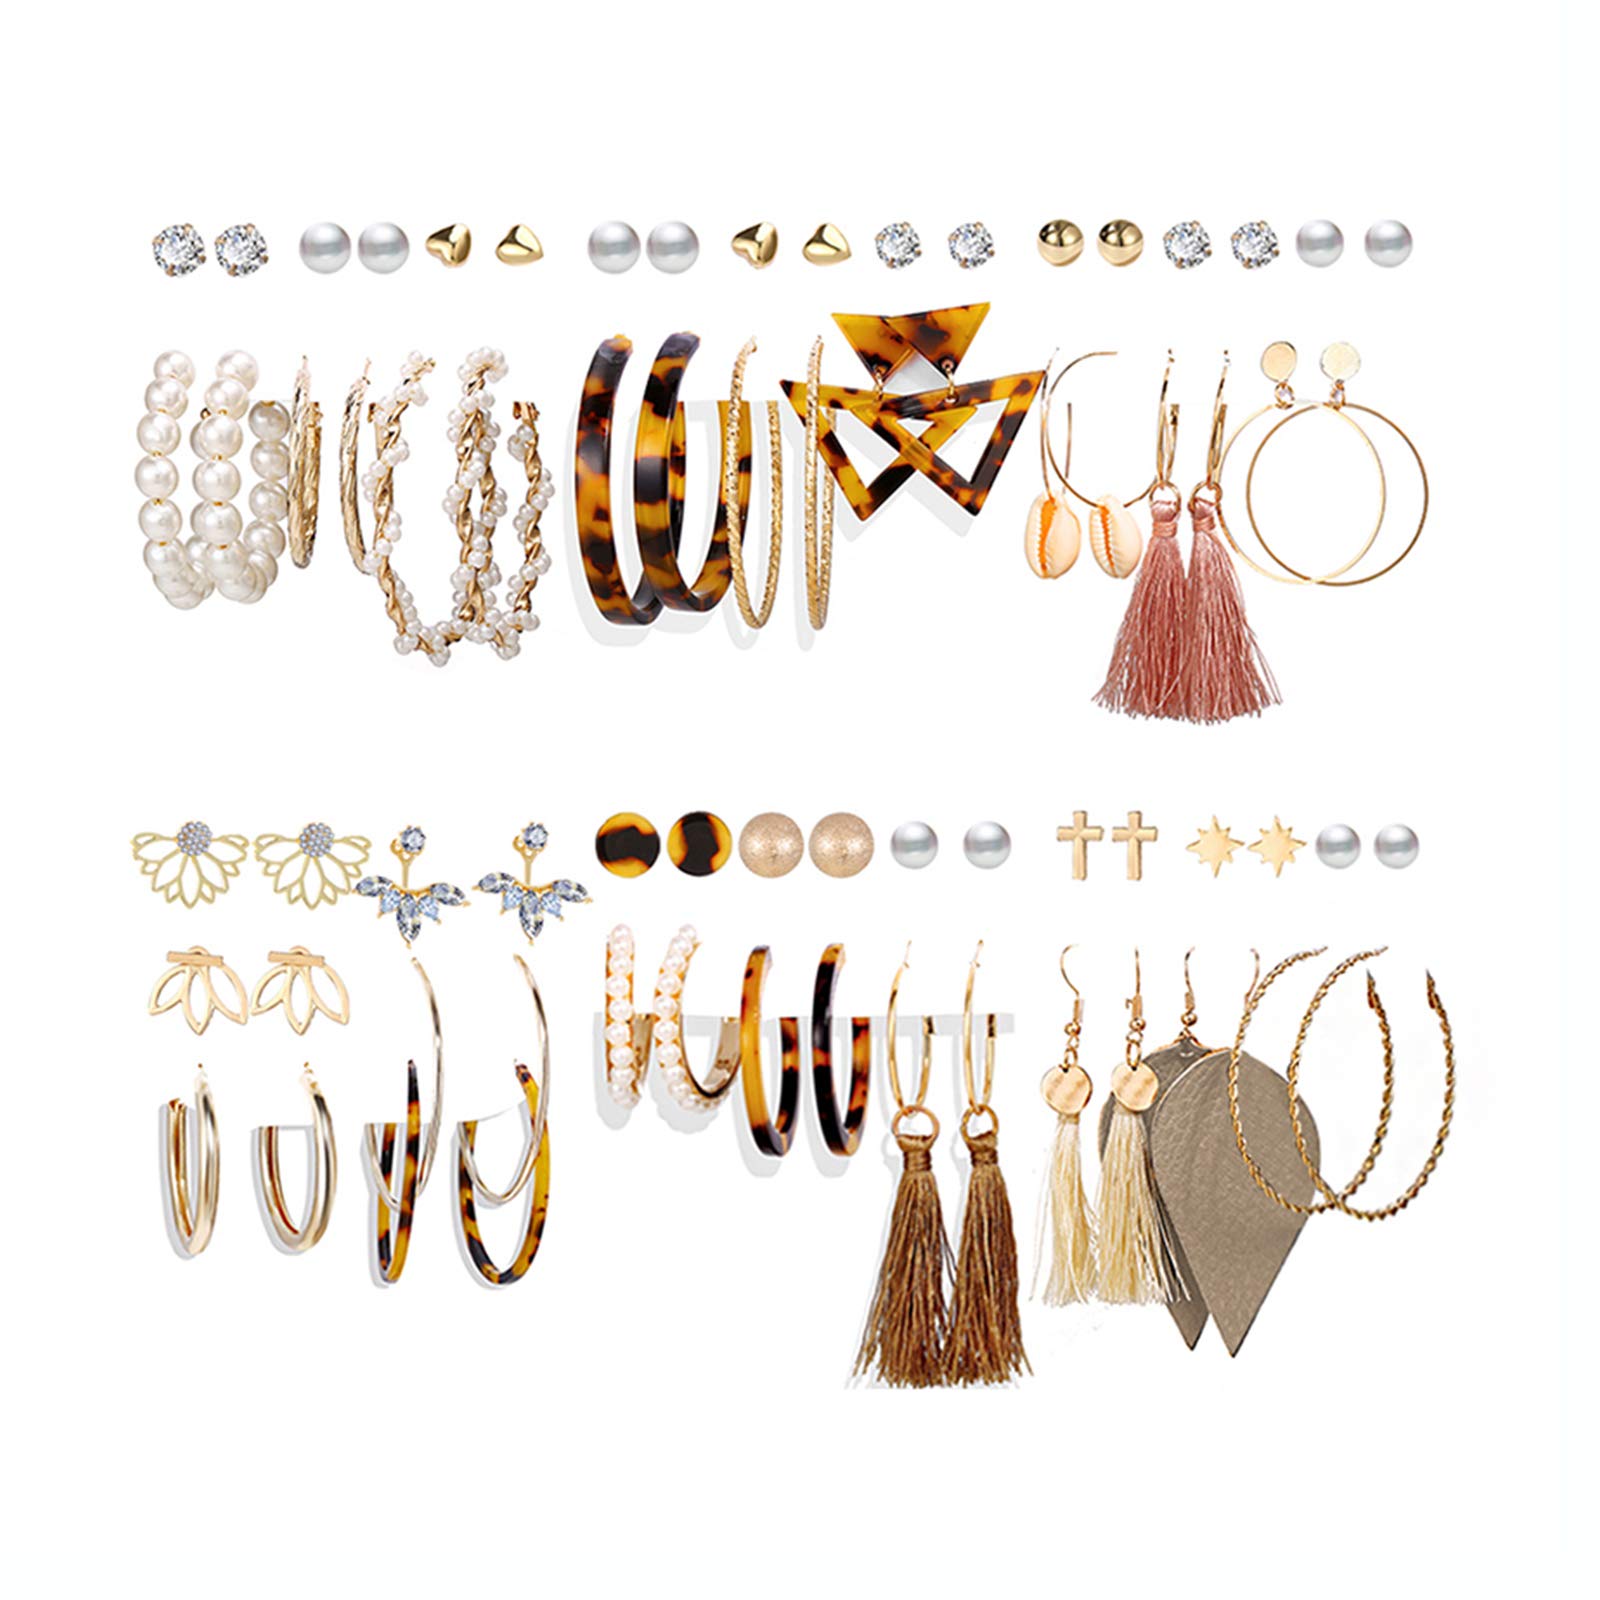 54 Pairs Gold Hoop Earrings Set for Women Multipack, Boho Fashion Statement Stud Hoop Earrings Pack with Pearl Butterfly Shaped Assorted Small Big Hoop Earrings Jewelry for Gift